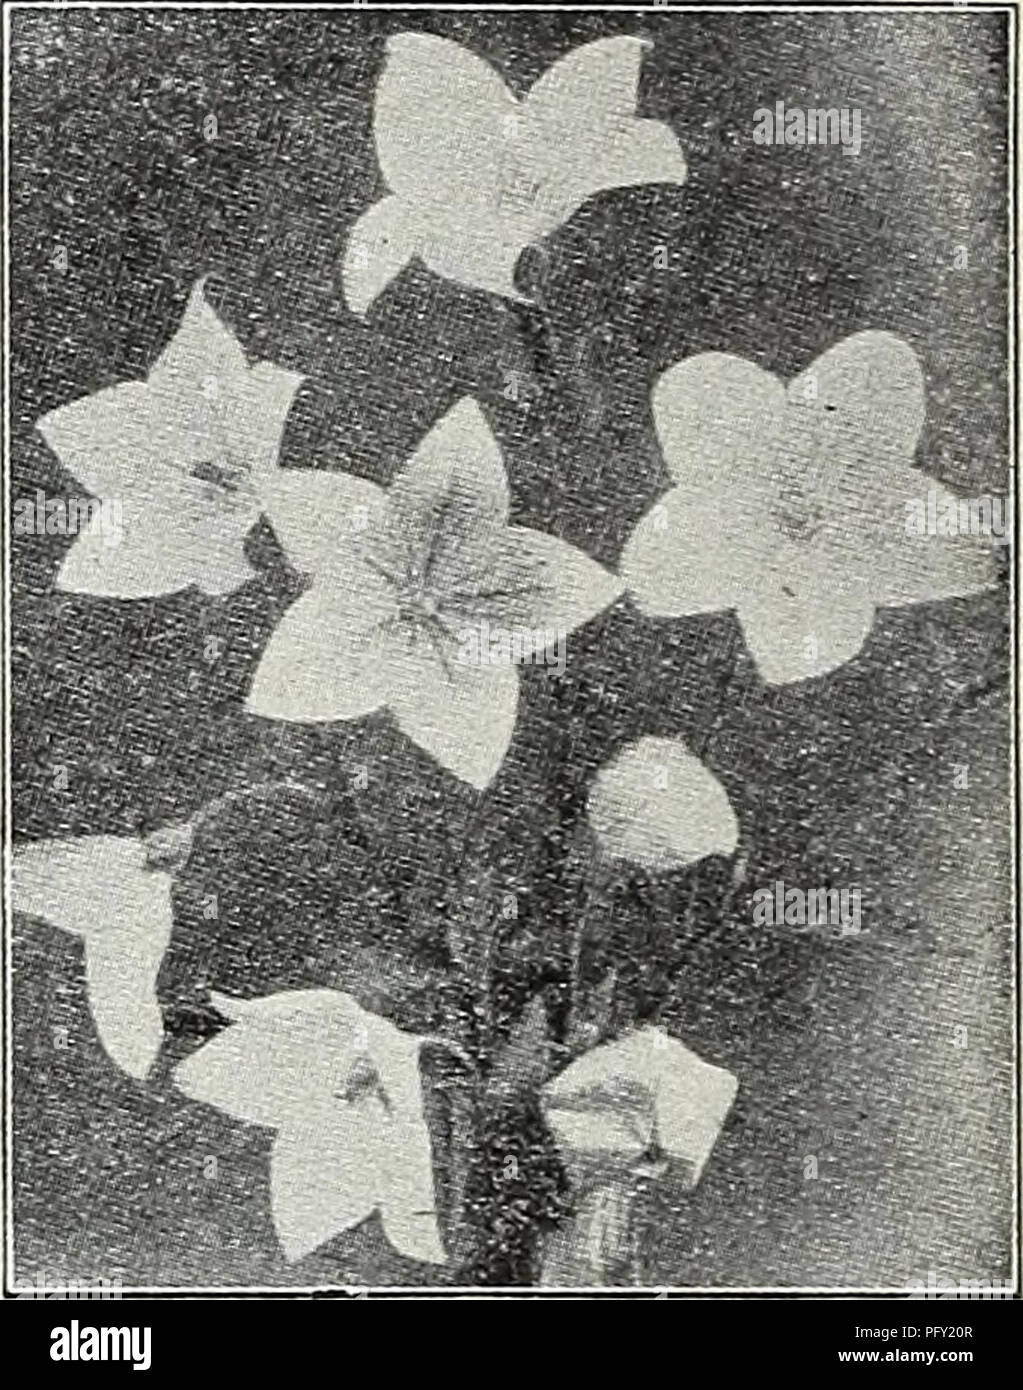 . Currie's garden annual : spring 1931 56th year. Flowers Seeds Catalogs; Bulbs (Plants) Seeds Catalogs; Vegetables Seeds Catalogs; Nurseries (Horticulture) Catalogs; Plants, Ornamental Catalogs; Gardening Equipment and supplies Catalogs. Sedum (Stone Crop) RANUNCULUS (Buttercup) Acris fl. pL—Double golden-yellow flowers. Repens, fl. pL—A creeping variety with golden-yellow flowers. Price, each, 25c; per doz., $2.50. RUDEBECKIA (Cone Flowers) Fulgida—Orange yellow with black Golden Glow—Grows 6 feet high, bear- ing masses of double golden-yellow flowers. Purpurea—Large, reddish-purple flow- er Stock Photo